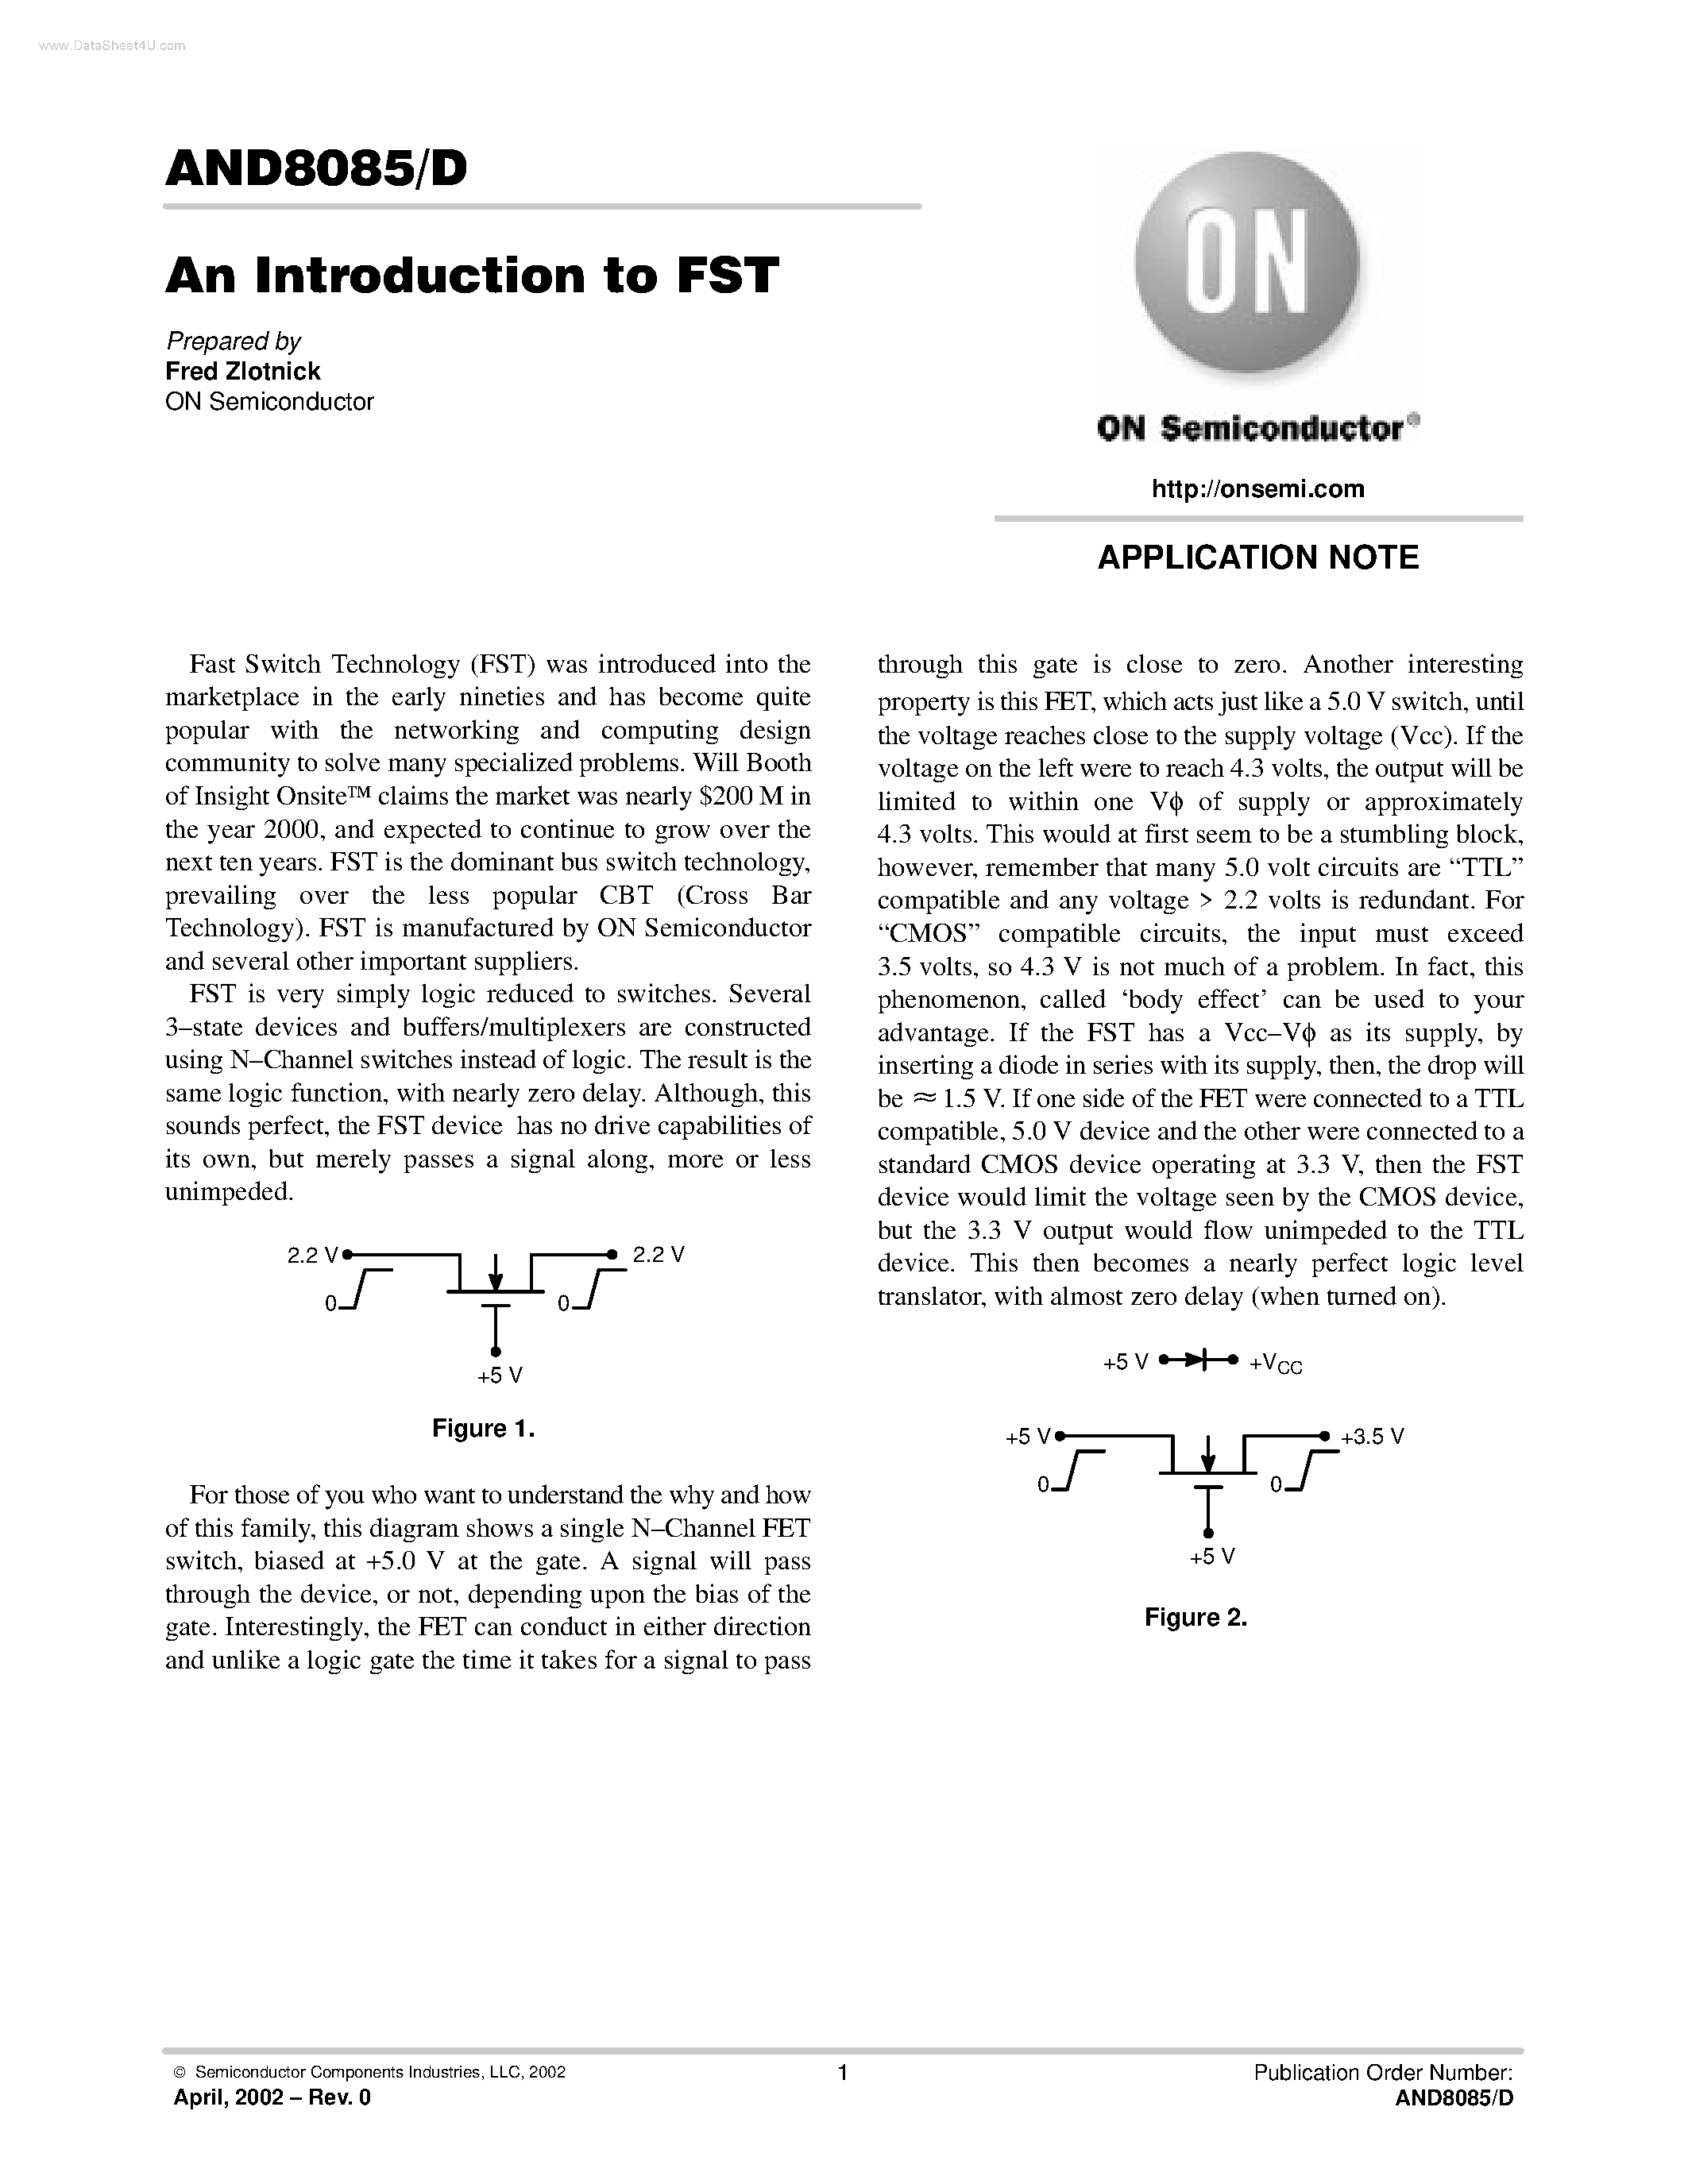 Datasheet AND8085D - An Introduction to FST page 1